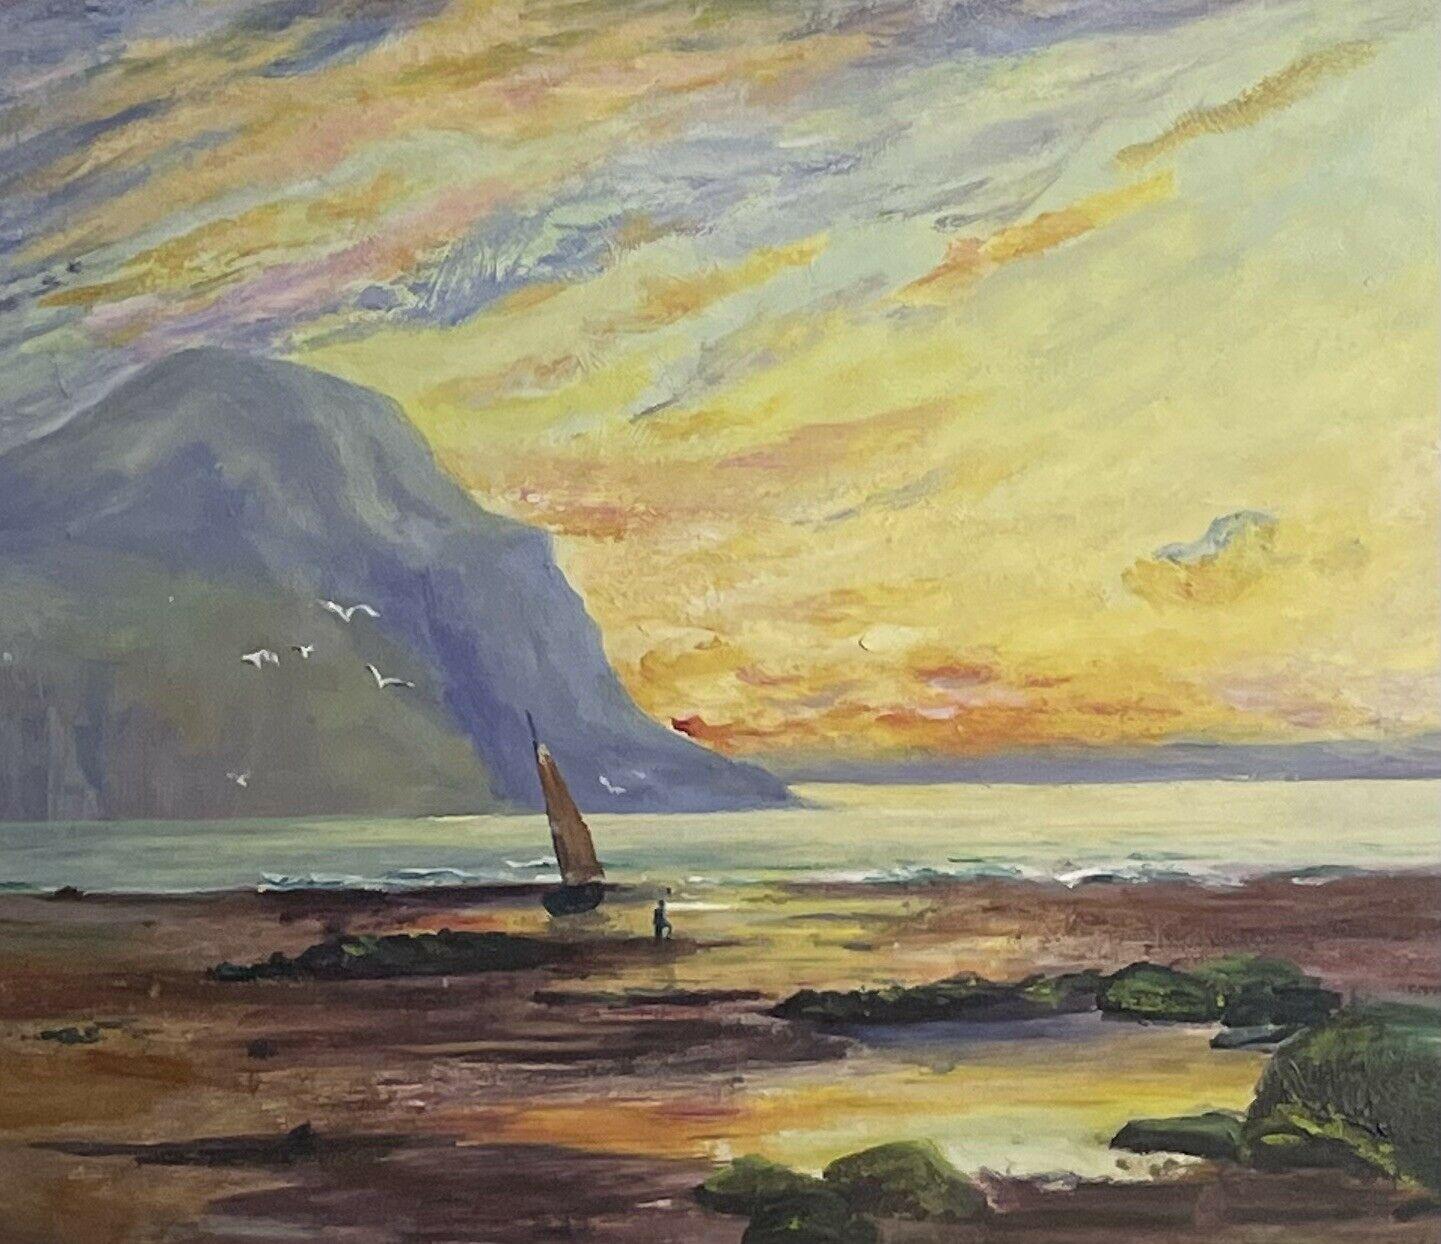 Artist/ School: British School, signed and dated verso, 1906

Title: Sunset on the Coast

Medium: oil painting on board, framed and inscribed verso.

framed:   9 x  11 inches
board:   5 x 7  inches

Provenance: private collection,